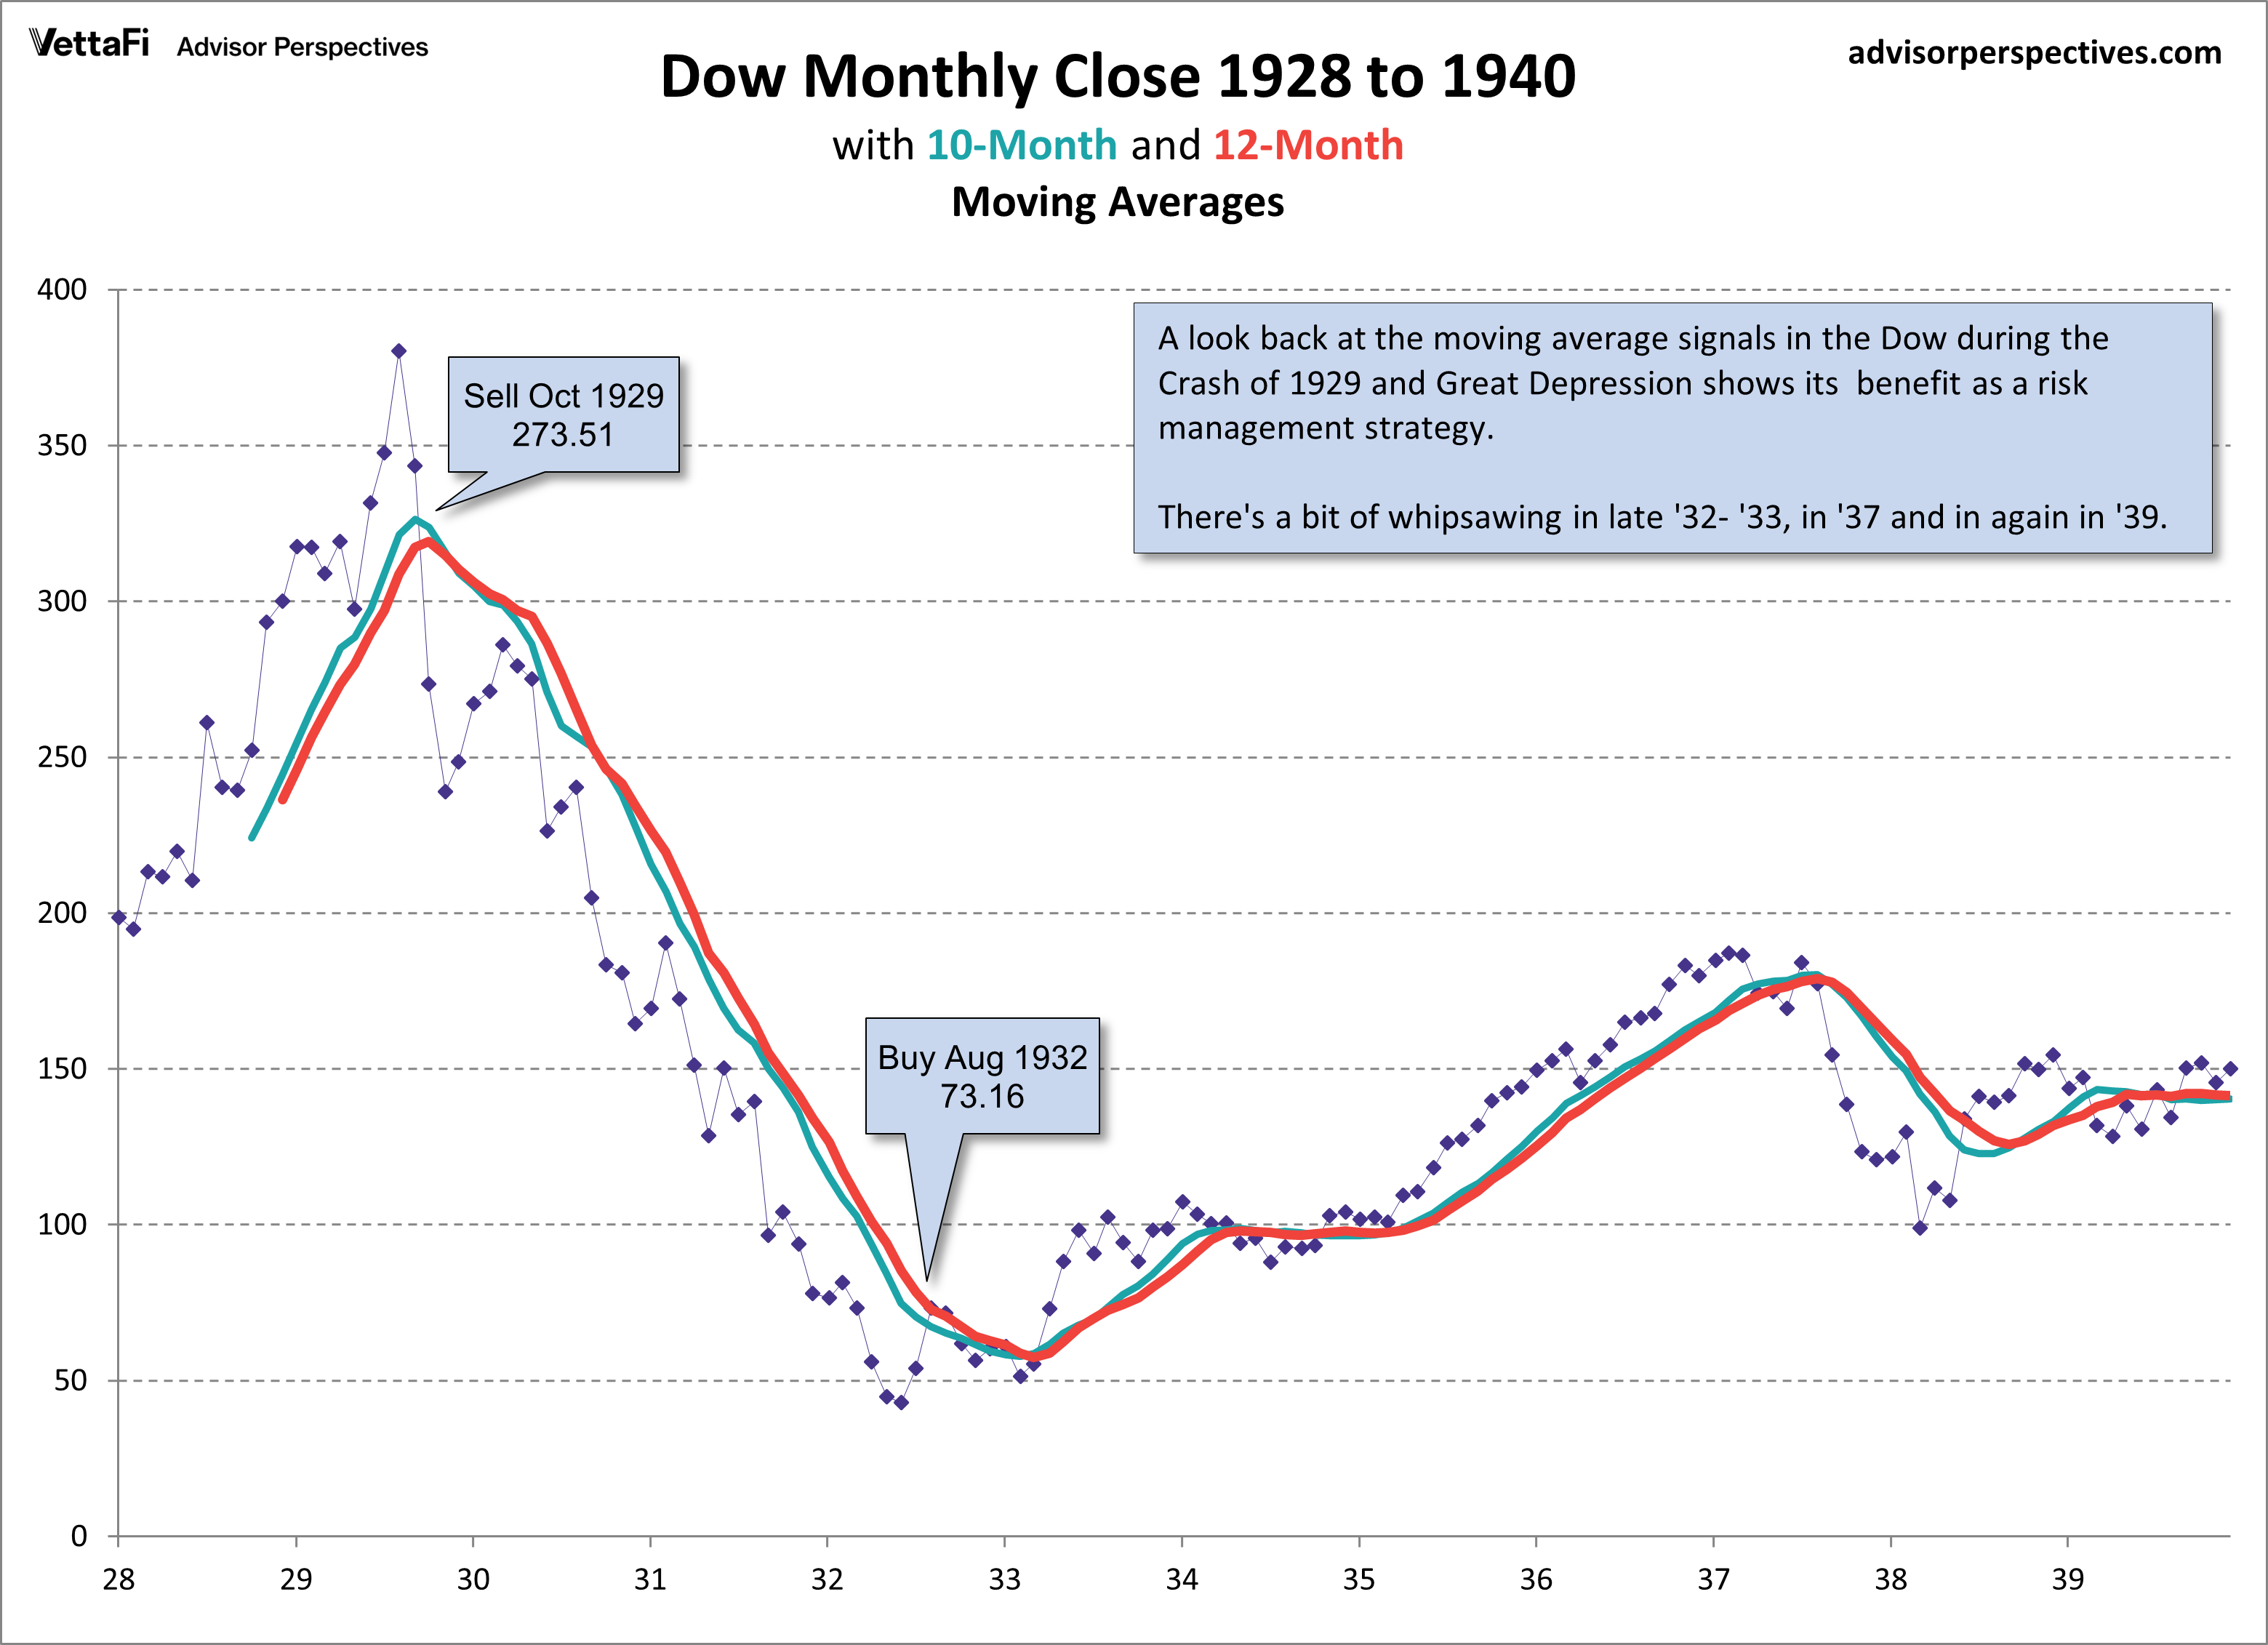 Dow Monthly Close 1928 to 1940